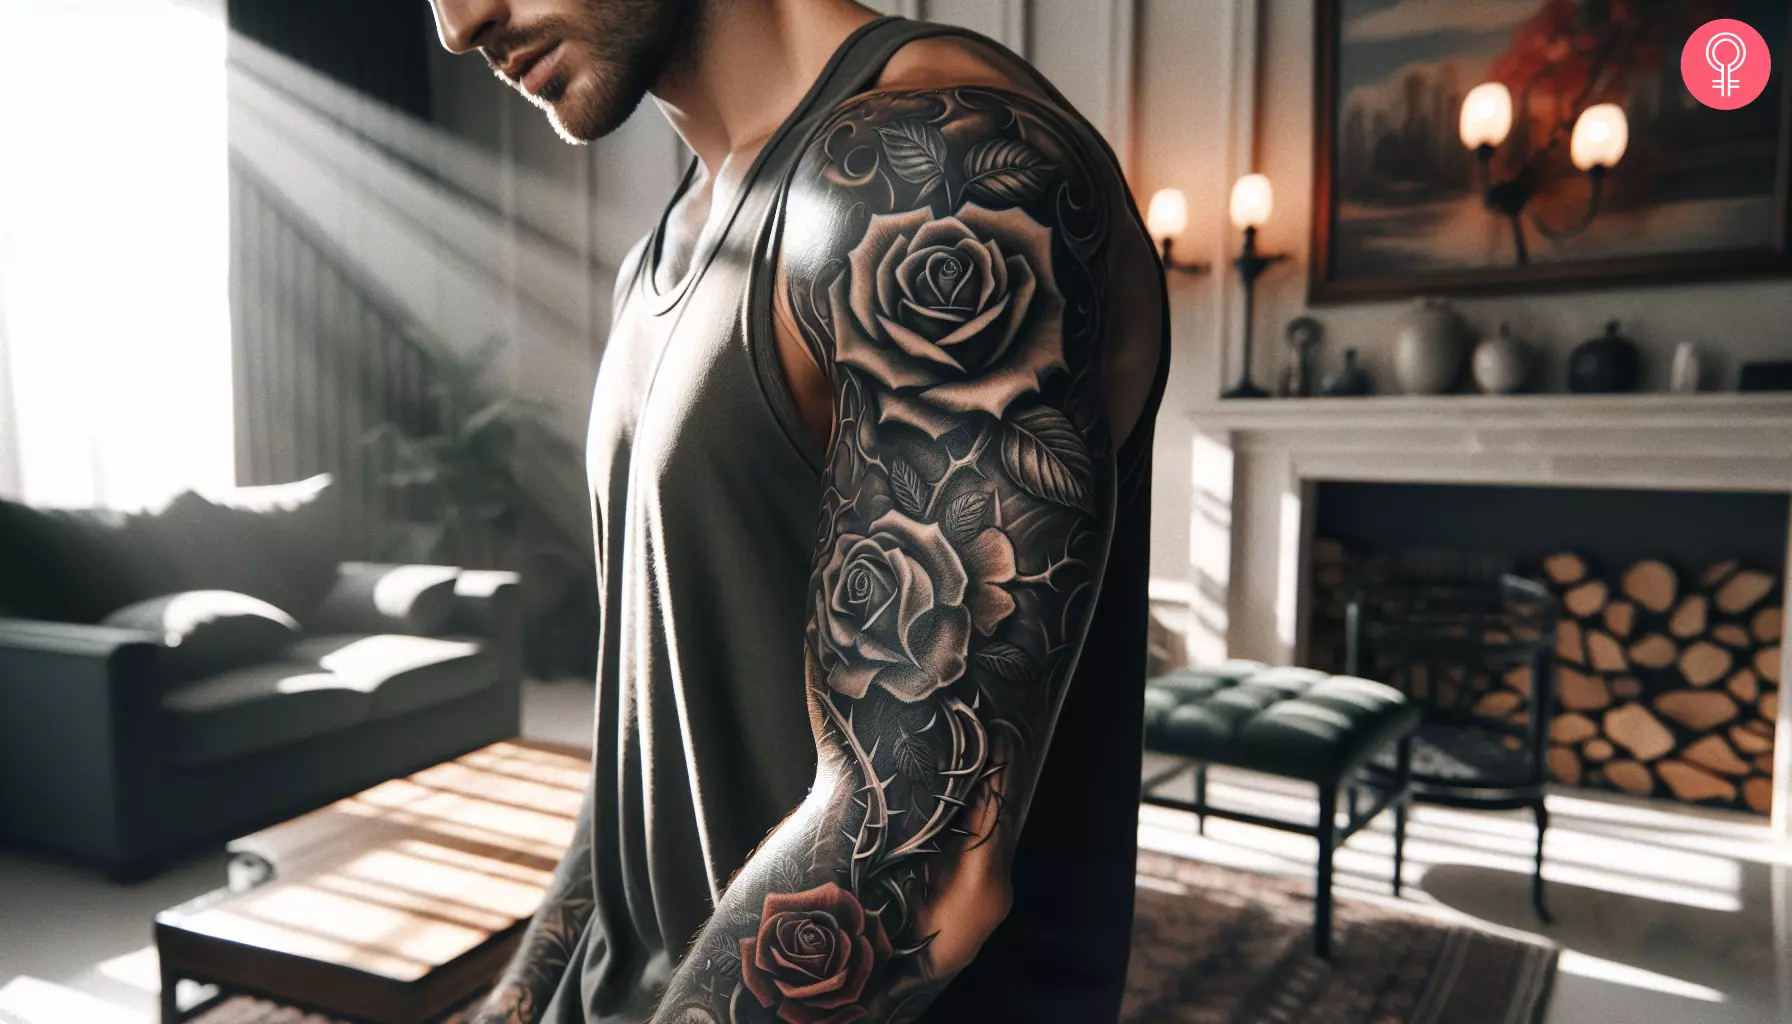 A rose with thorns tattoo sleeve on the arm